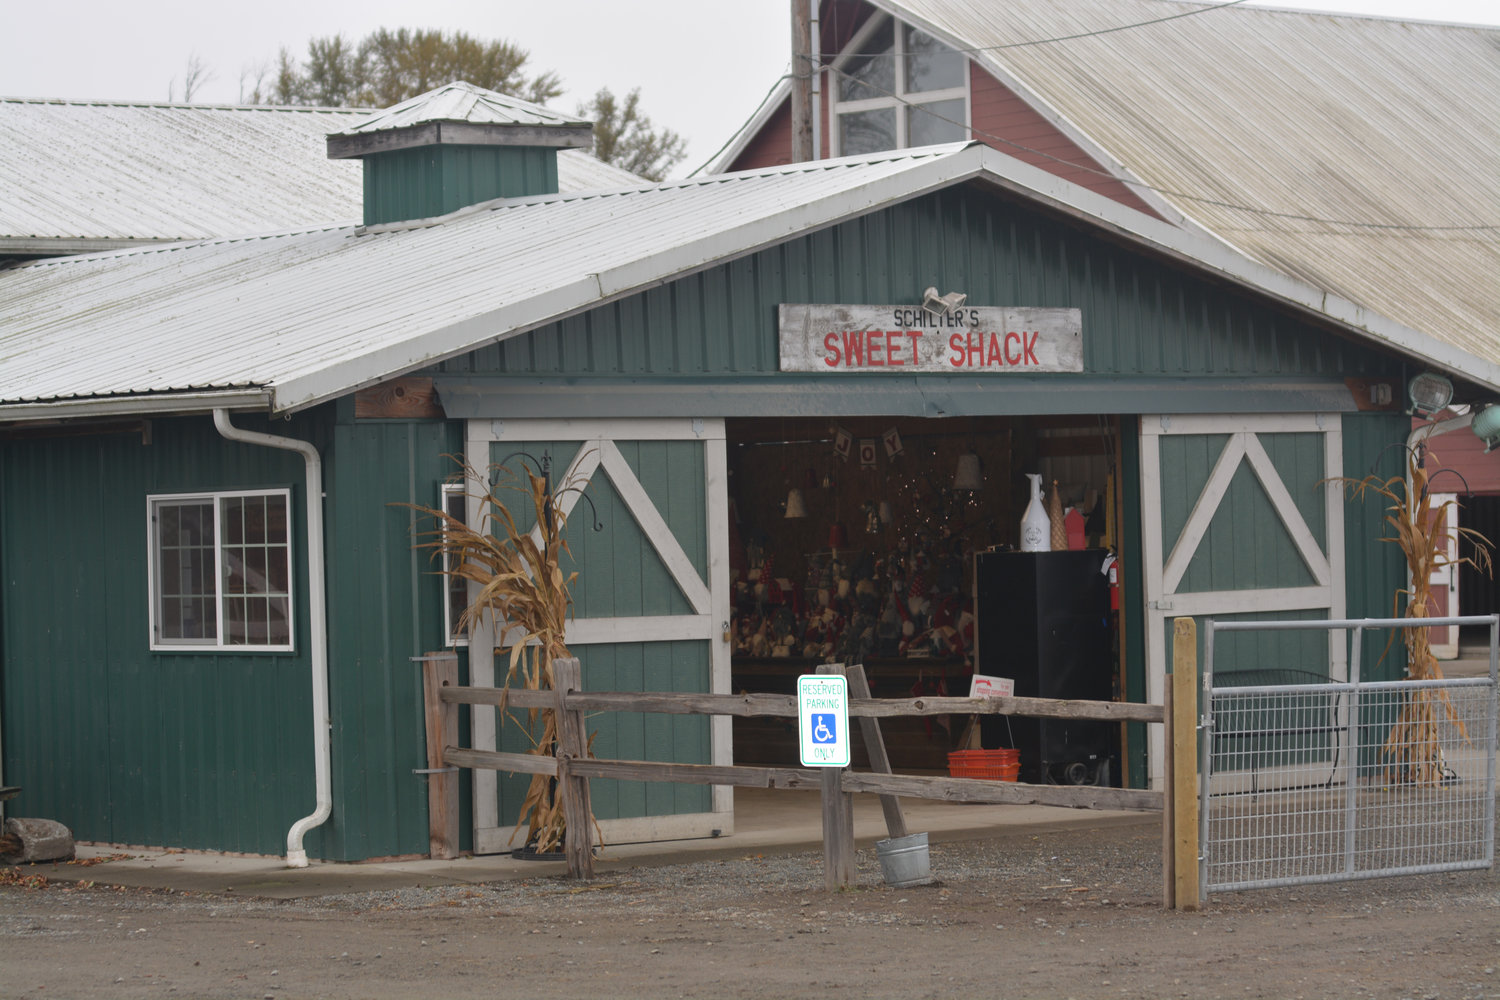 Schilter’s Sweet Shack offers sweet treats for visitors of the farm.